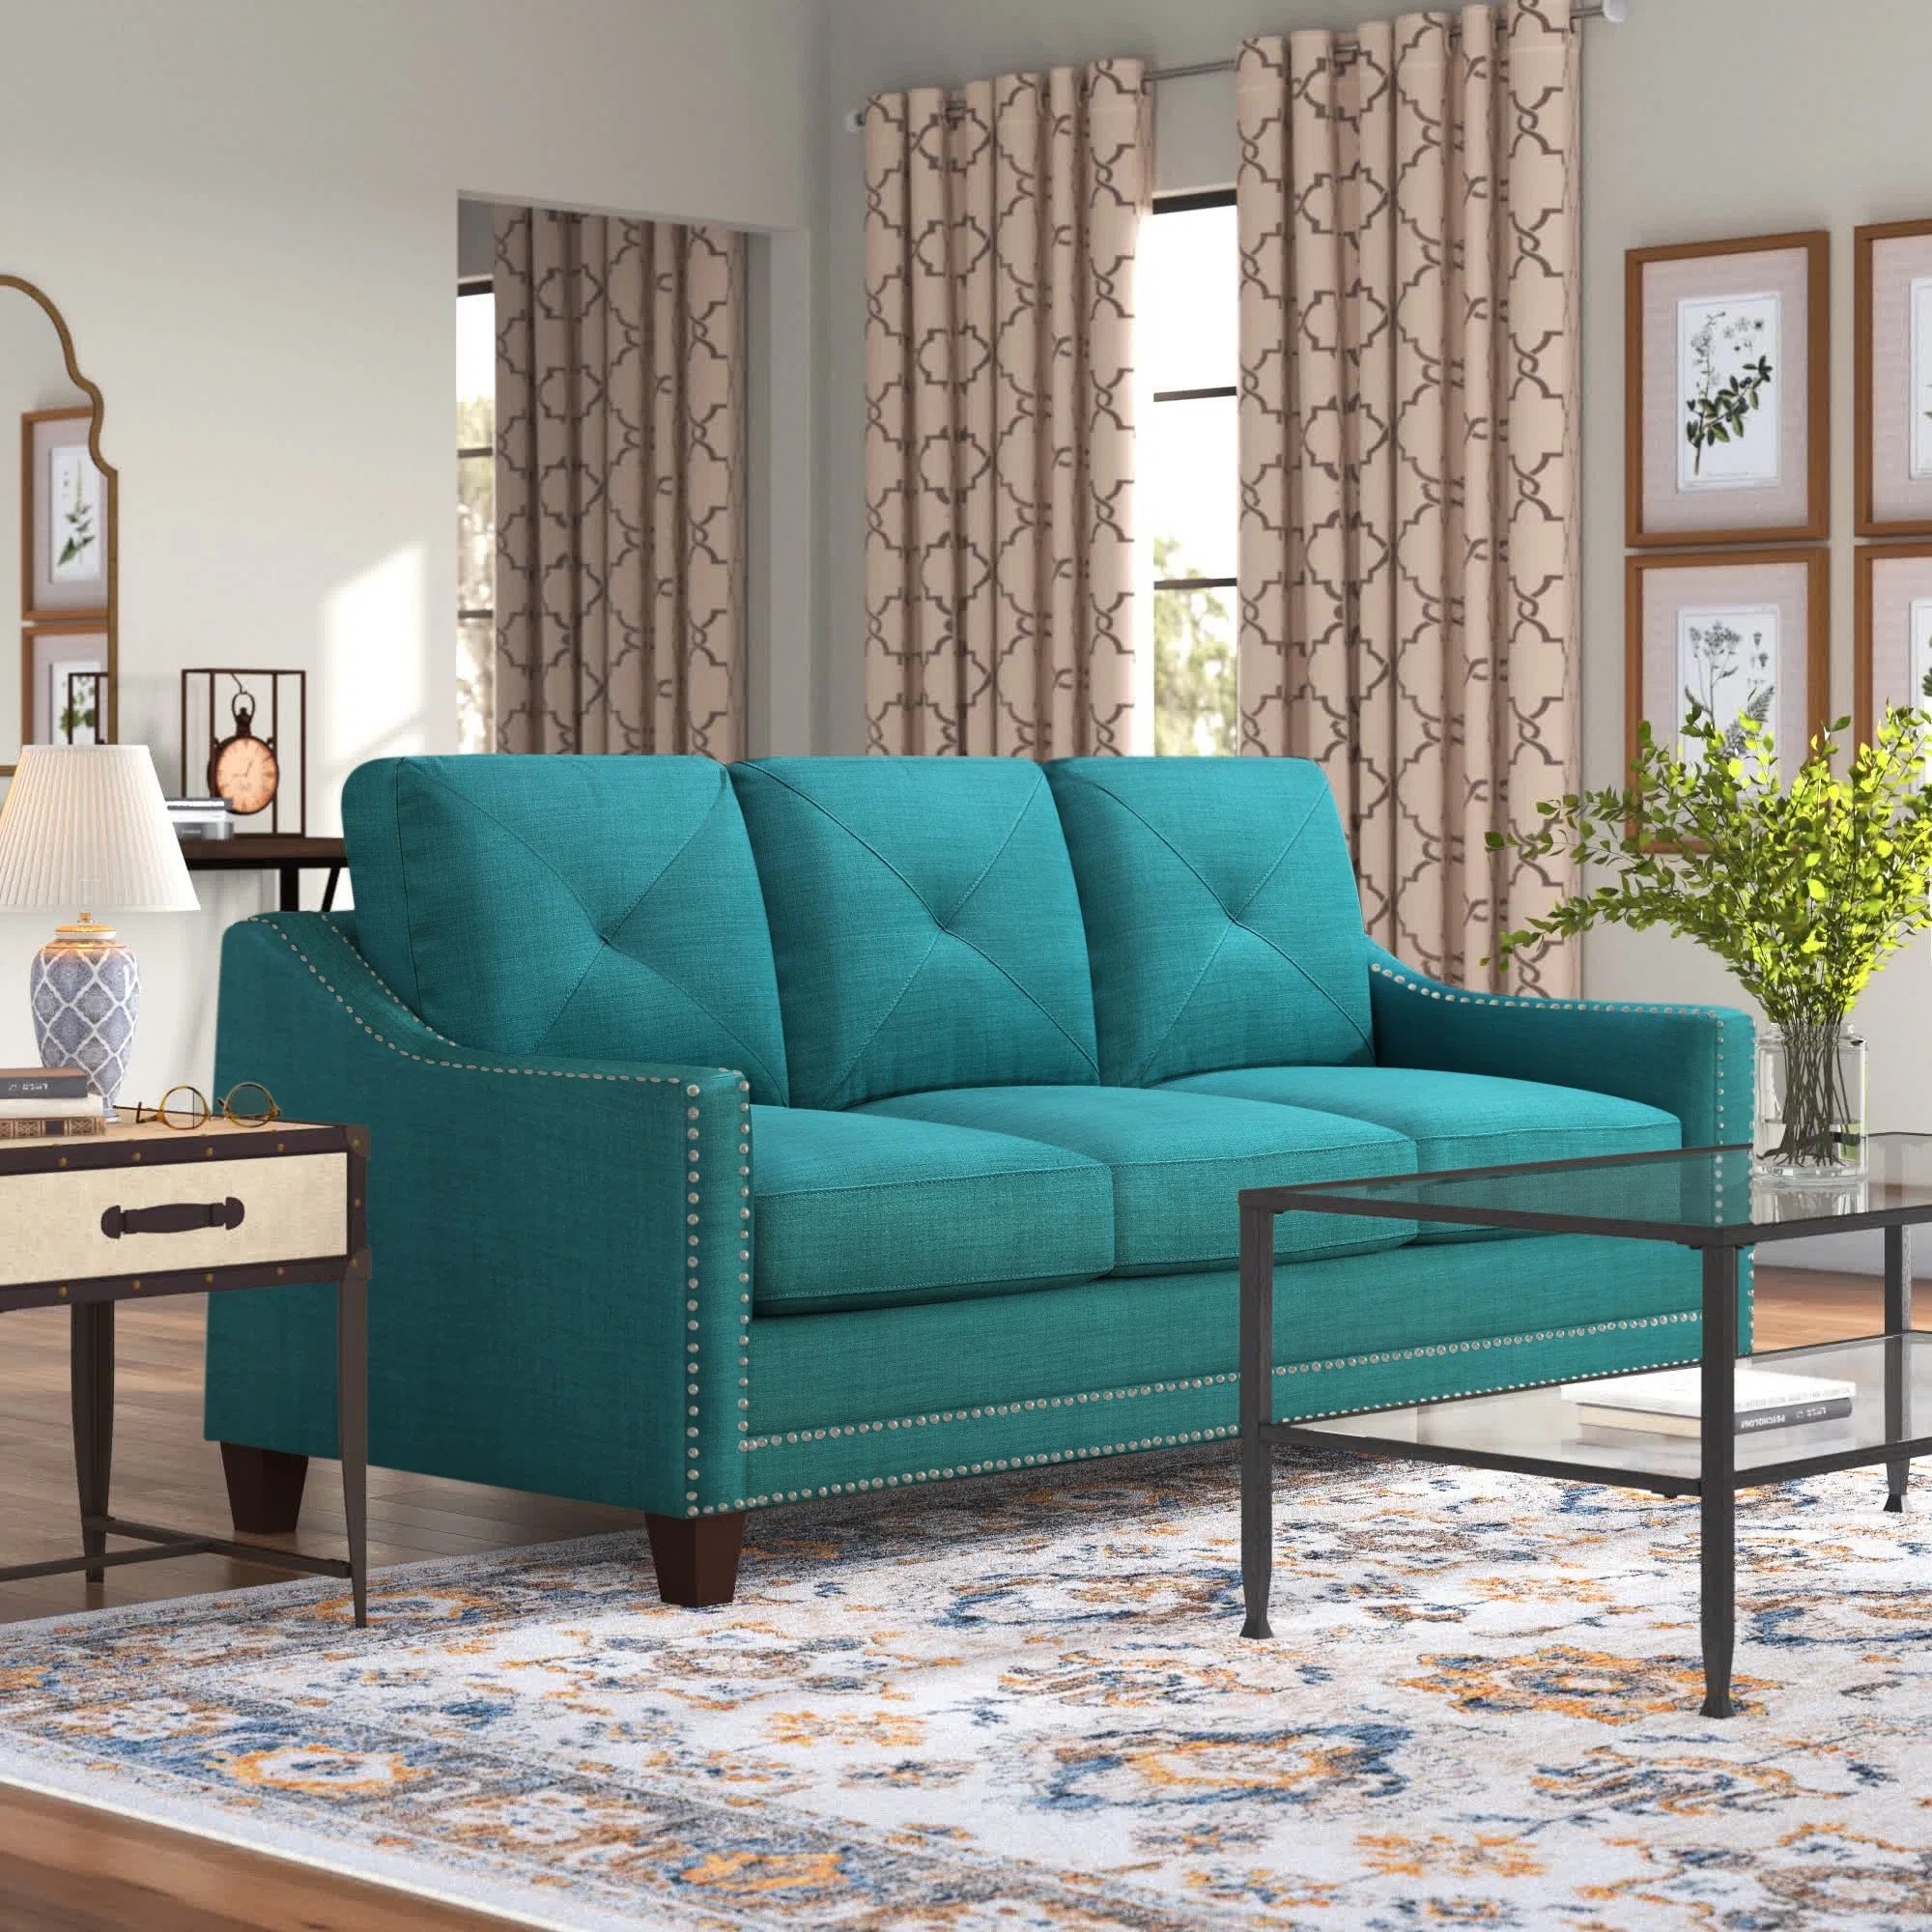 a teal sofa with metal tufts in a cozy living room